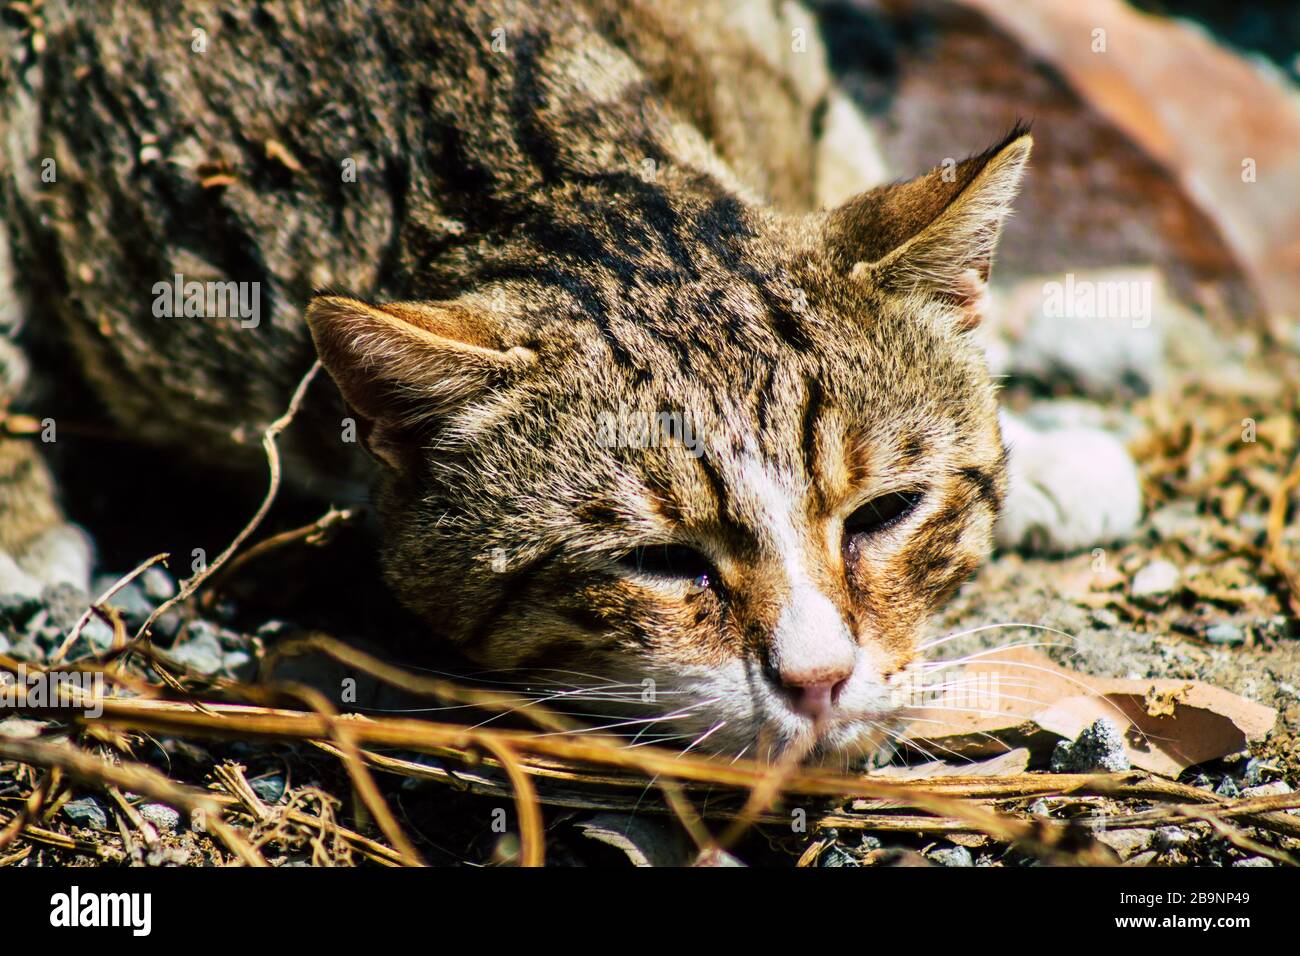 Limassol Cyprus March 24 2020 View Of Abandoned Domestic Cat Living In The Streets Of Limassol In Cyprus Island Stock Photo Alamy